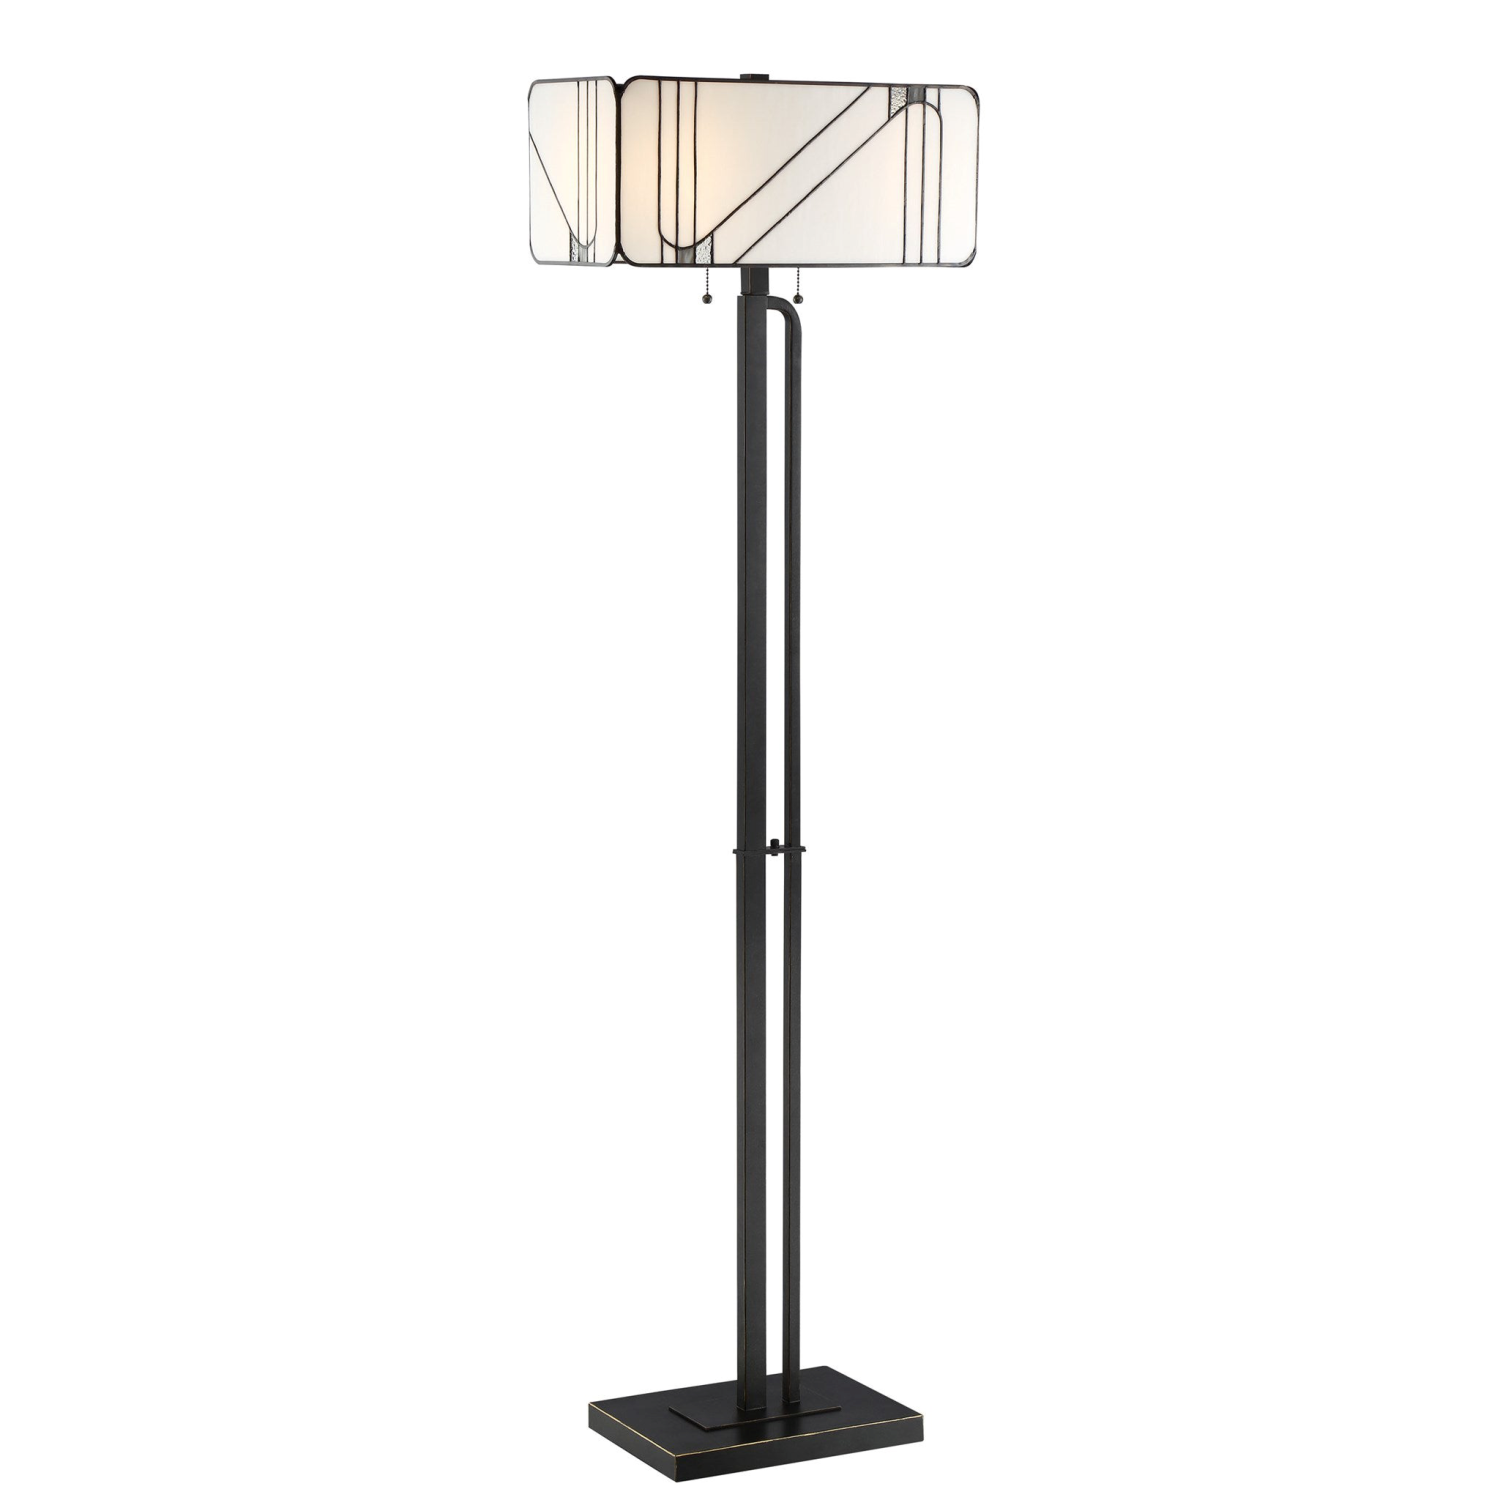 Tulani Floor Lamp Picture with White Background